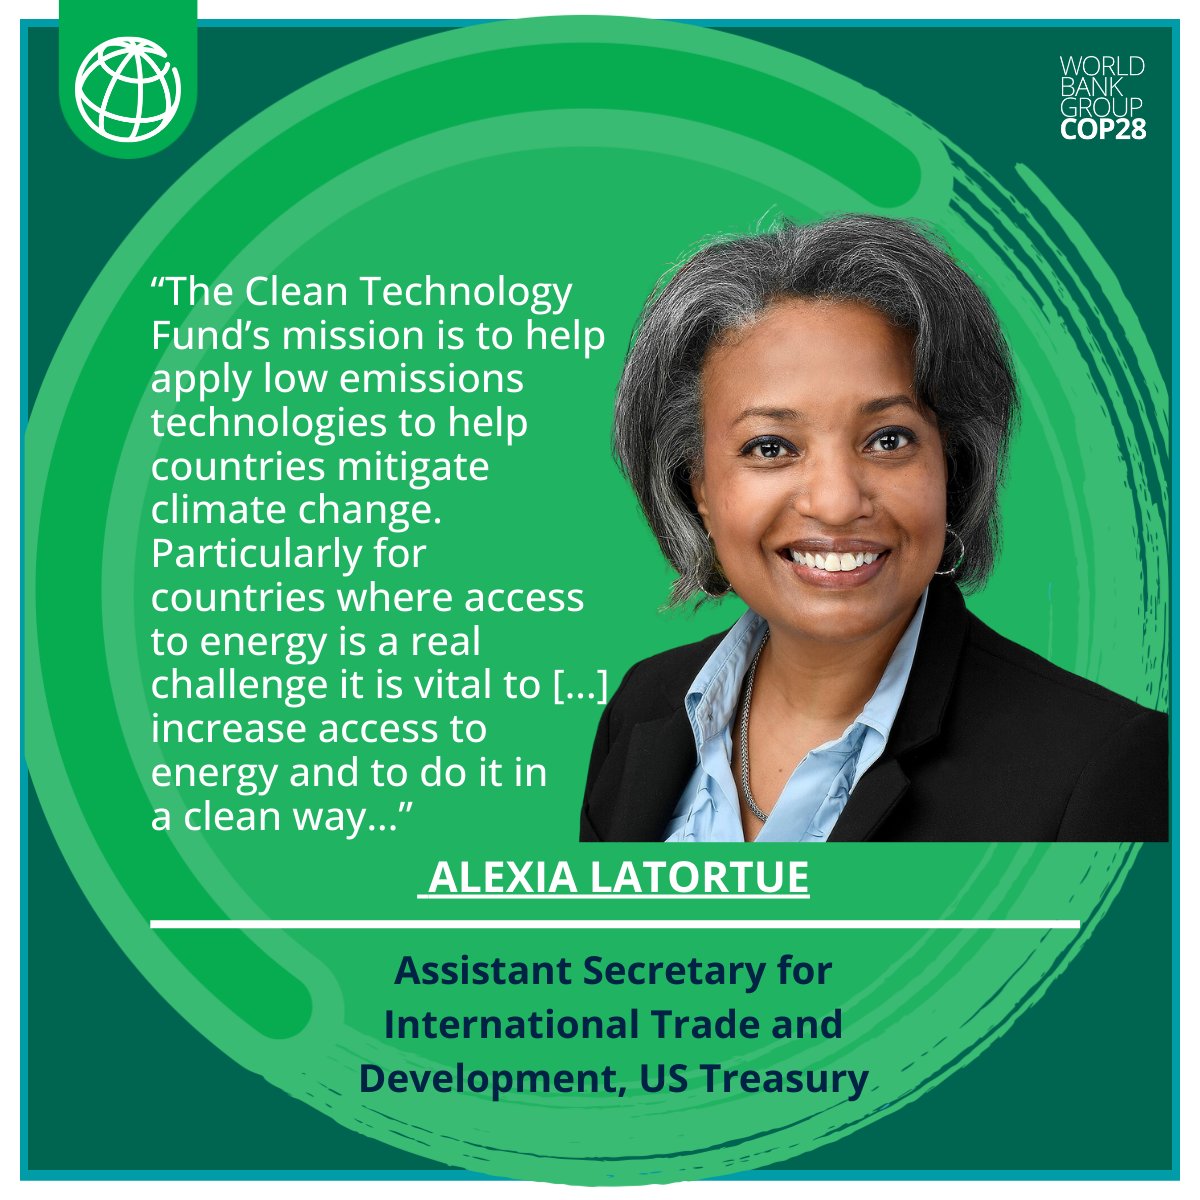 Thank you @AlexiaLatortue @USTreasury for sharing how technologies are helping countries leapfrog innovations into clean energy access during our #COP28UAE panel. Watch the replay >
youtube.com/watch?v=UhjNY4… #climateaction